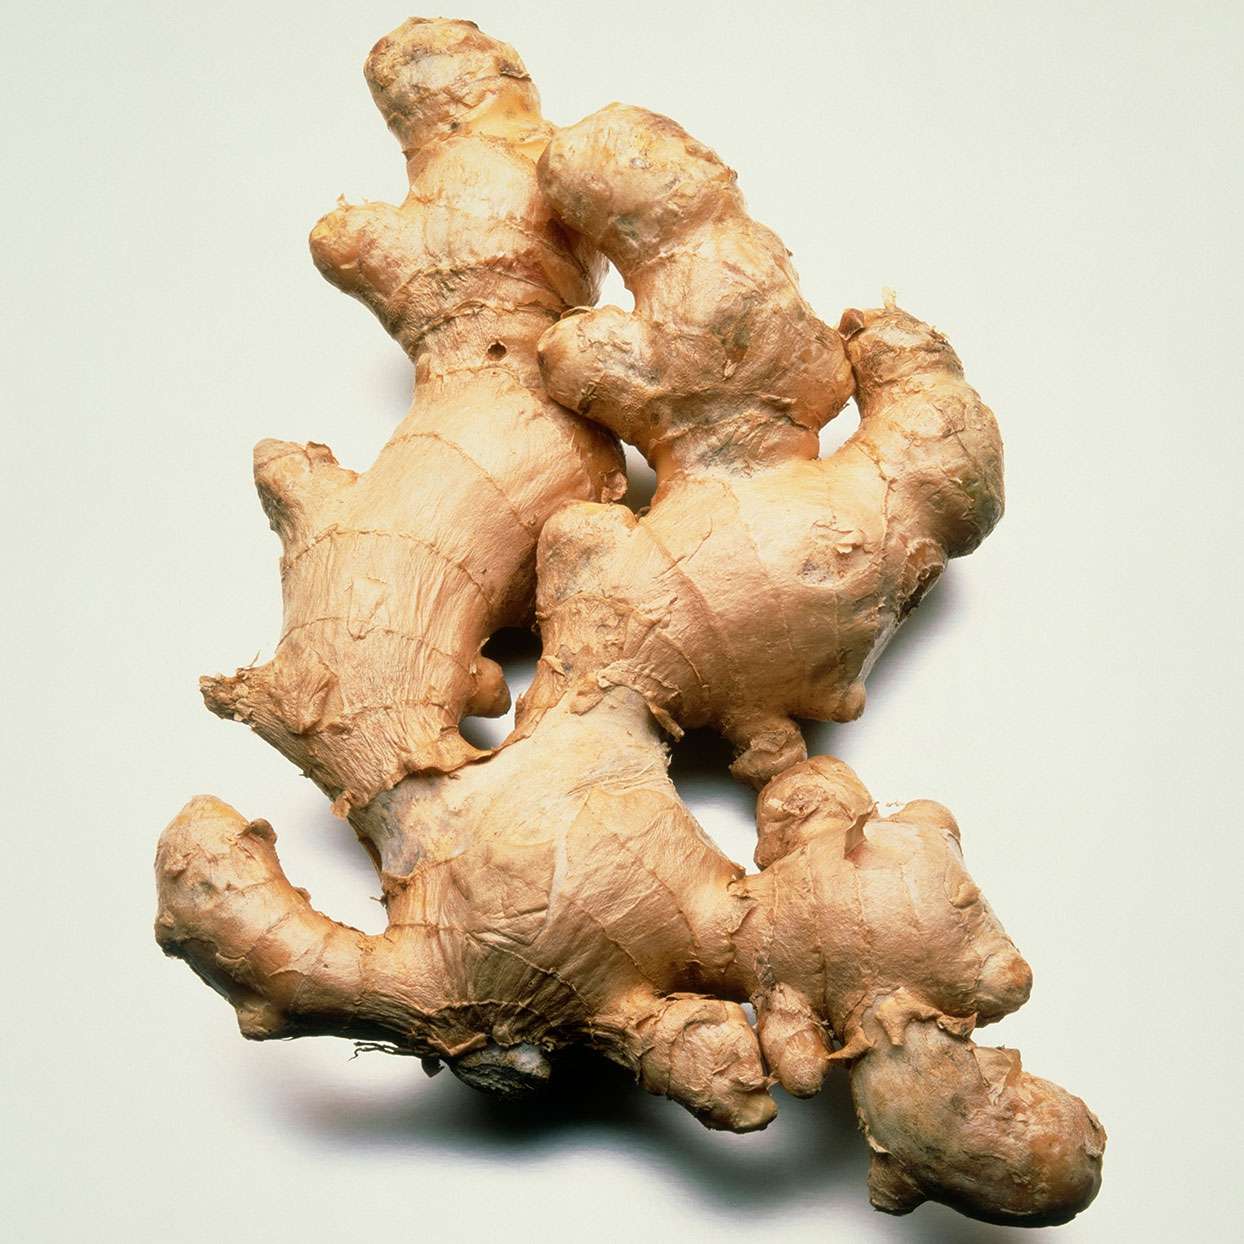 Local Produce Ginger (per KG)